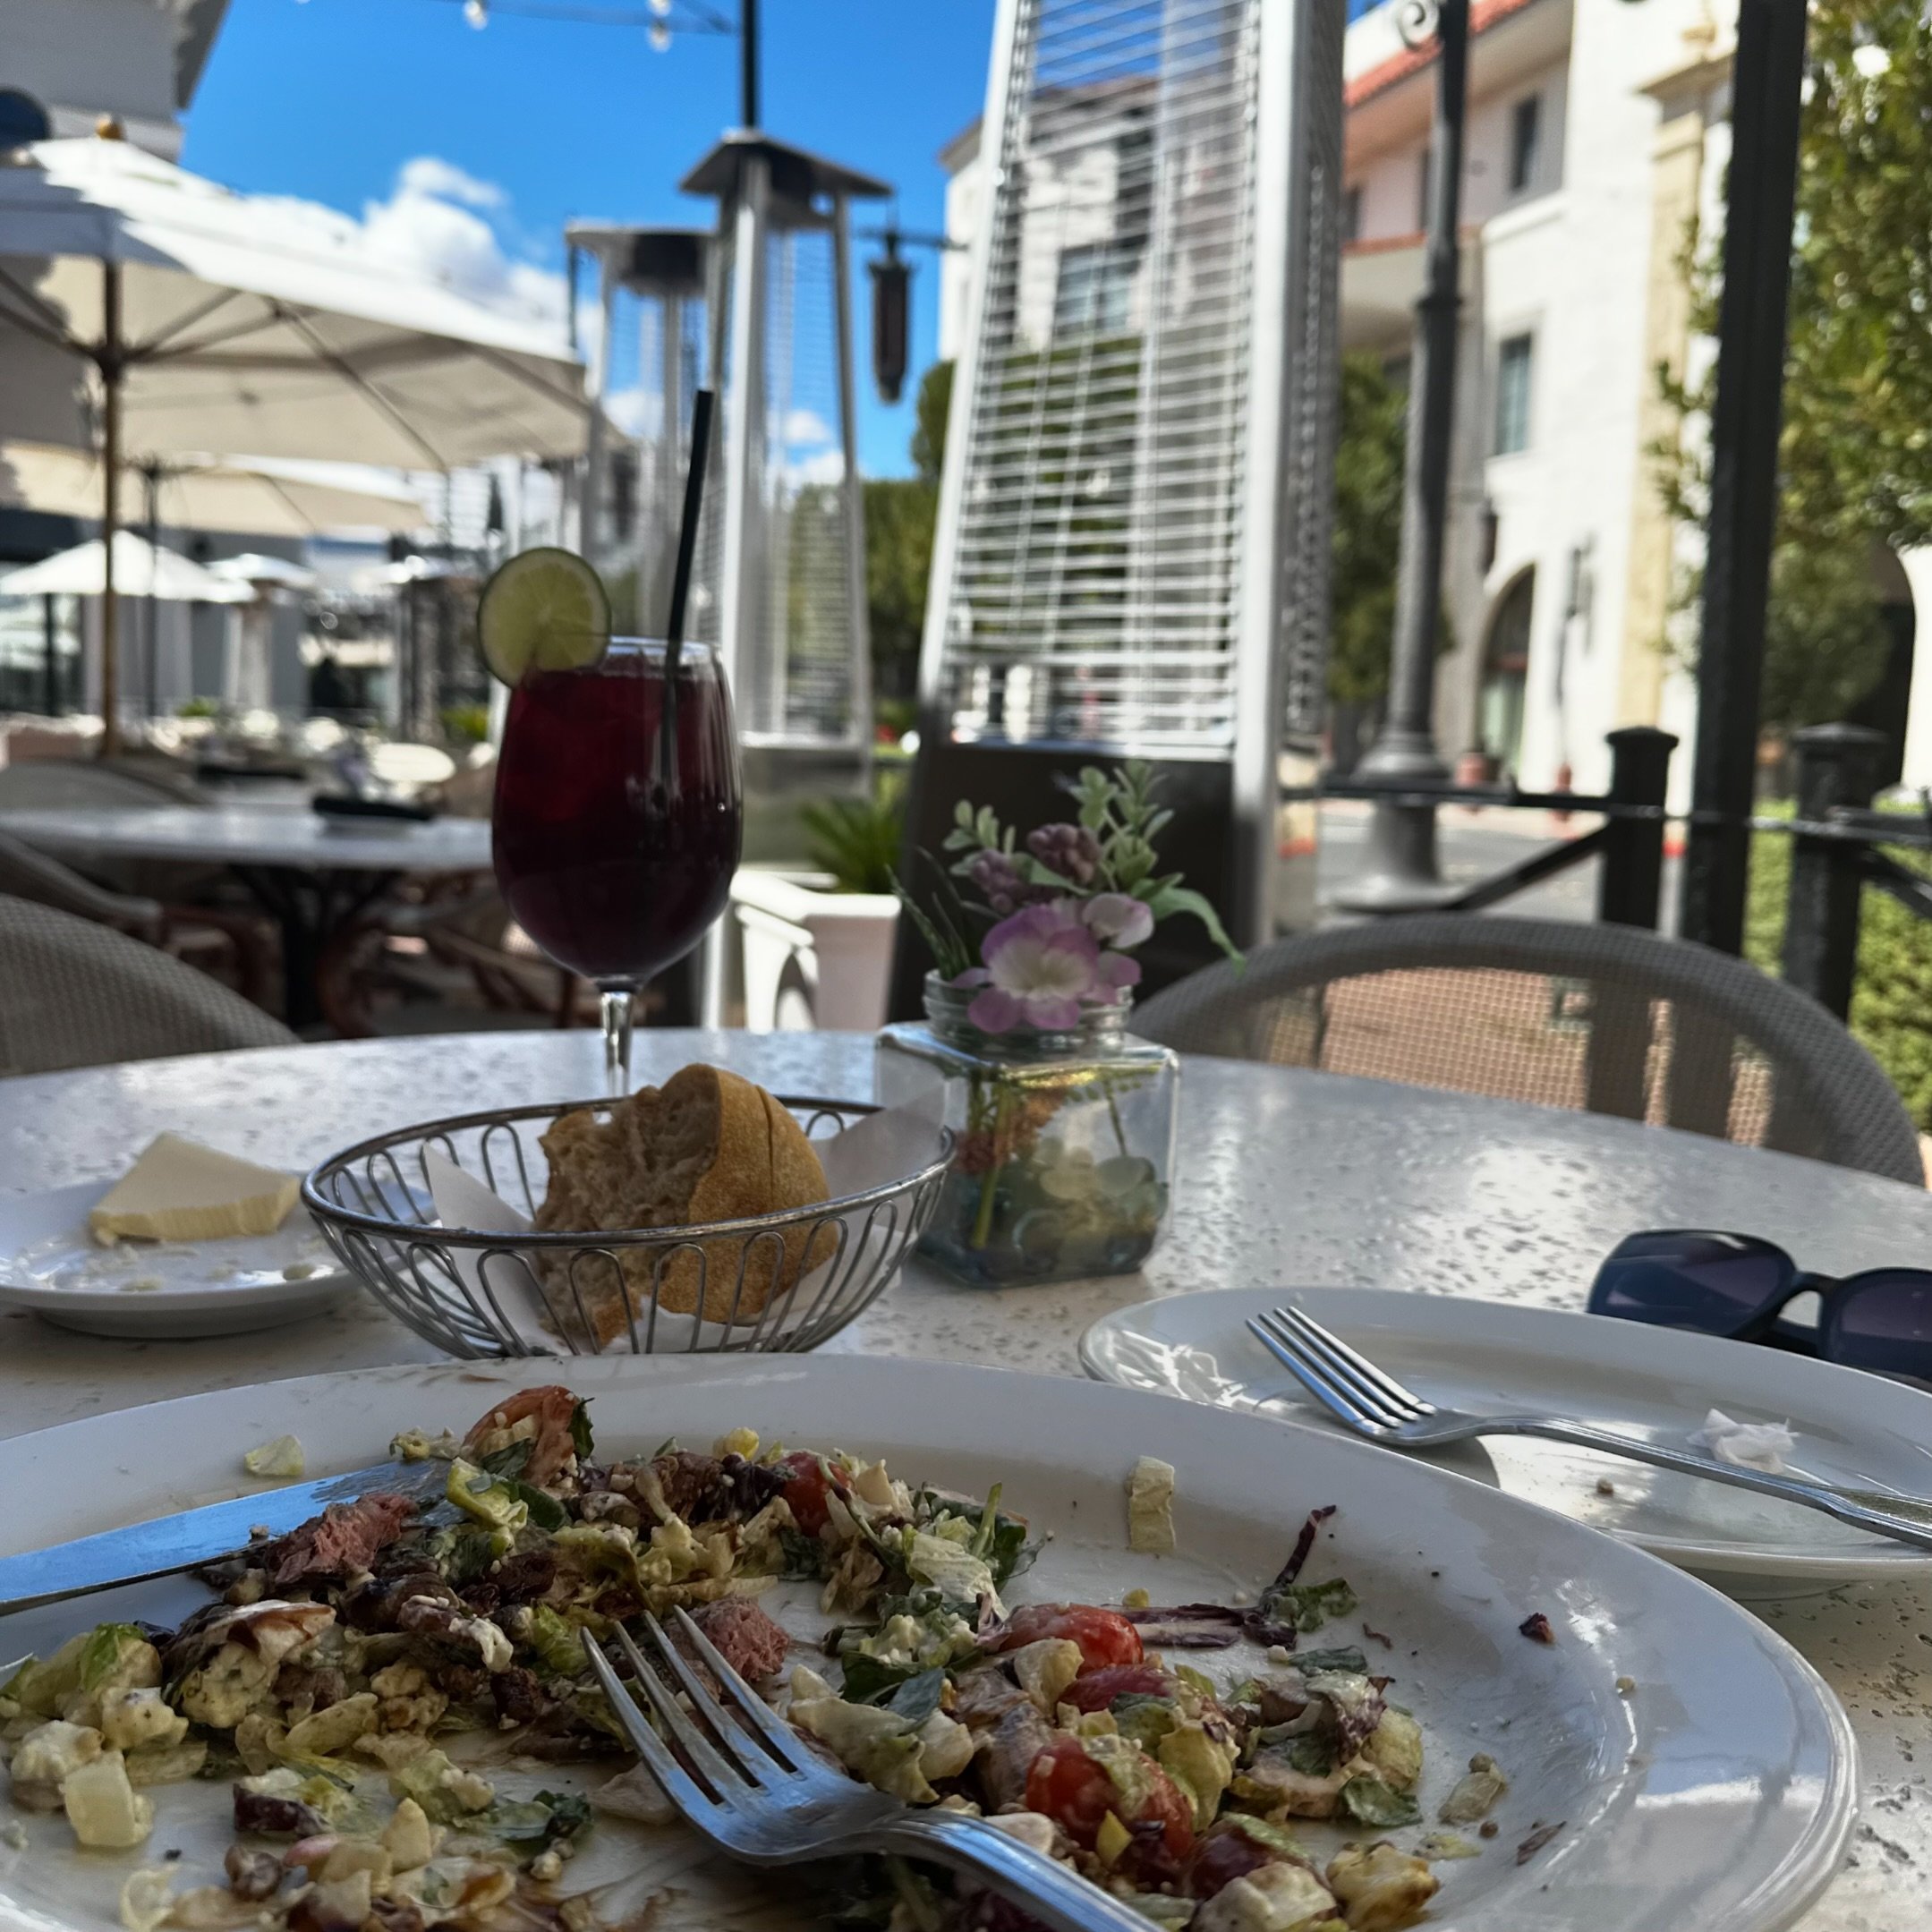 hobby: devouring steak salads and sangrias in the afternoon sun. love meeting friends, but kinda love dining solo, too. x, z.🍷🕶️ @brioitaliangrille